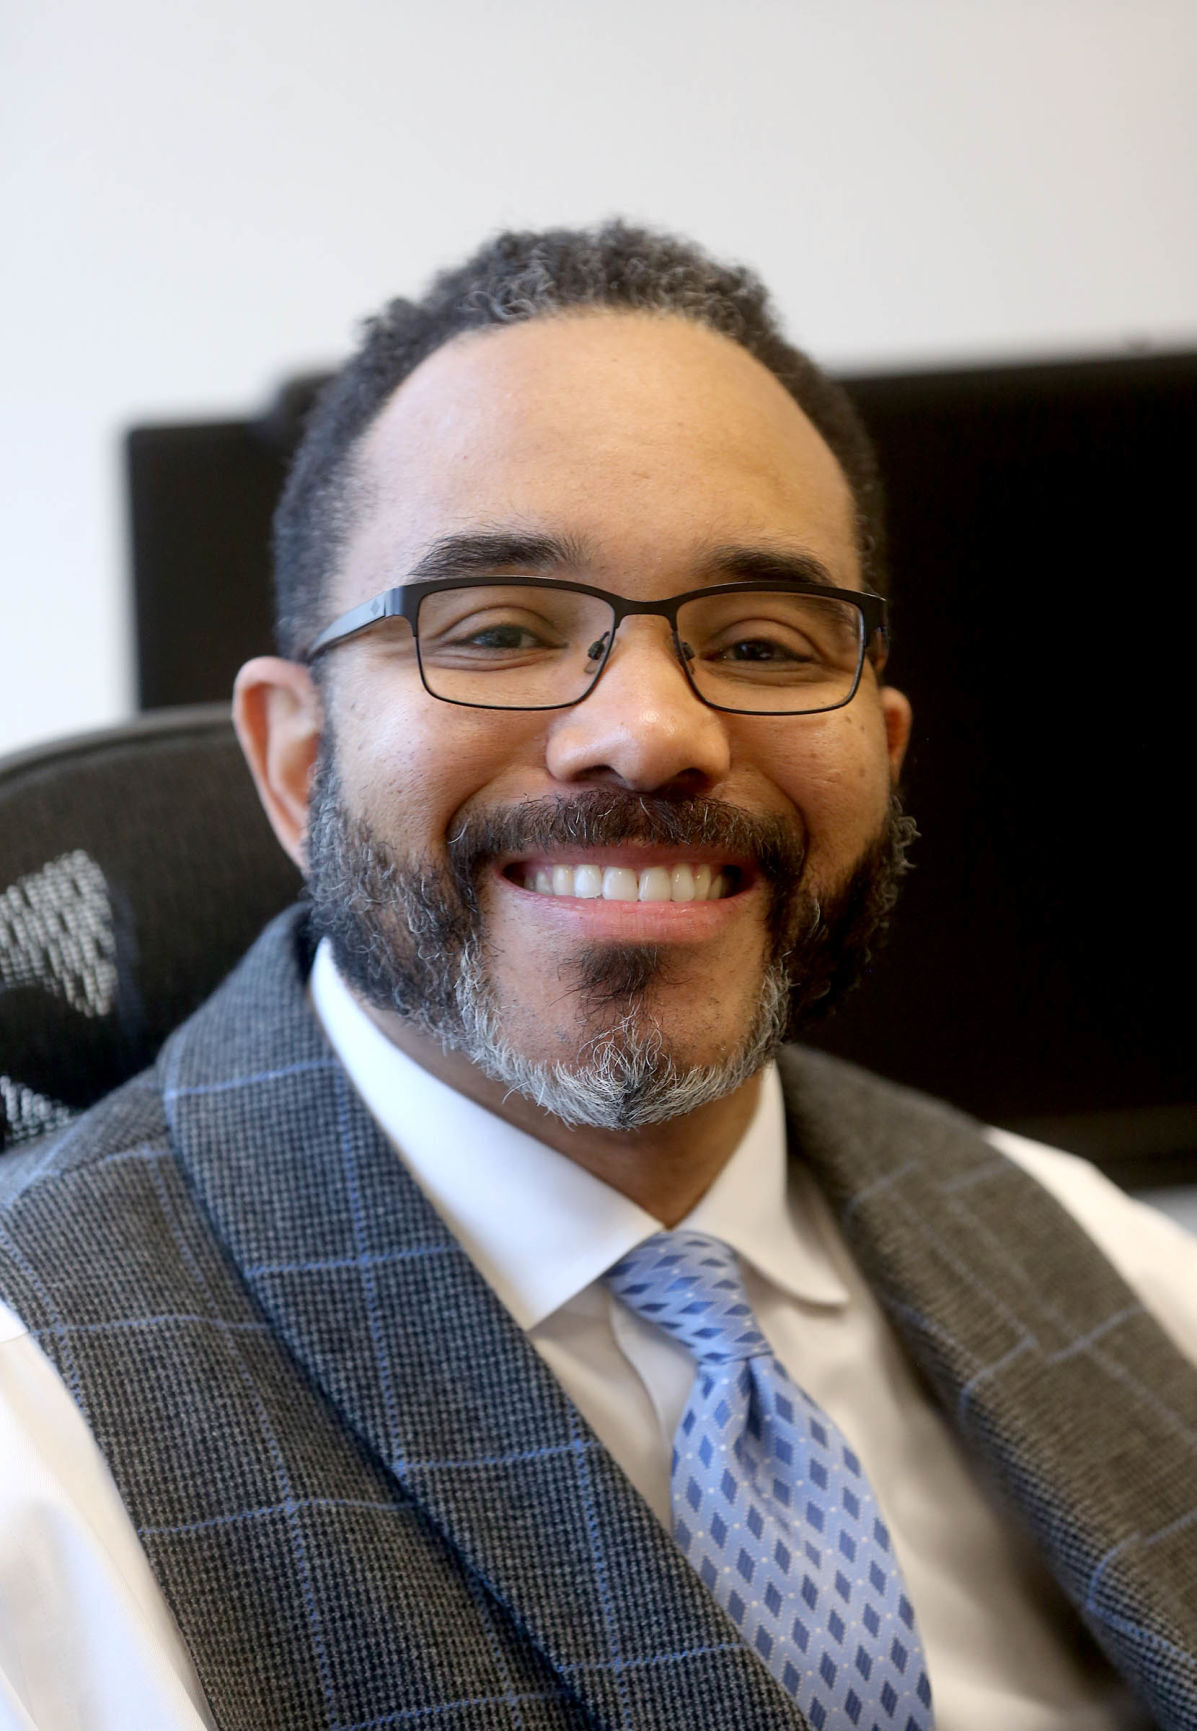 Dr. Ricardo Cunningham is director of master in management program and department head for business and accounting at University of Dubuque. PHOTO CREDIT: Jessica Reilly